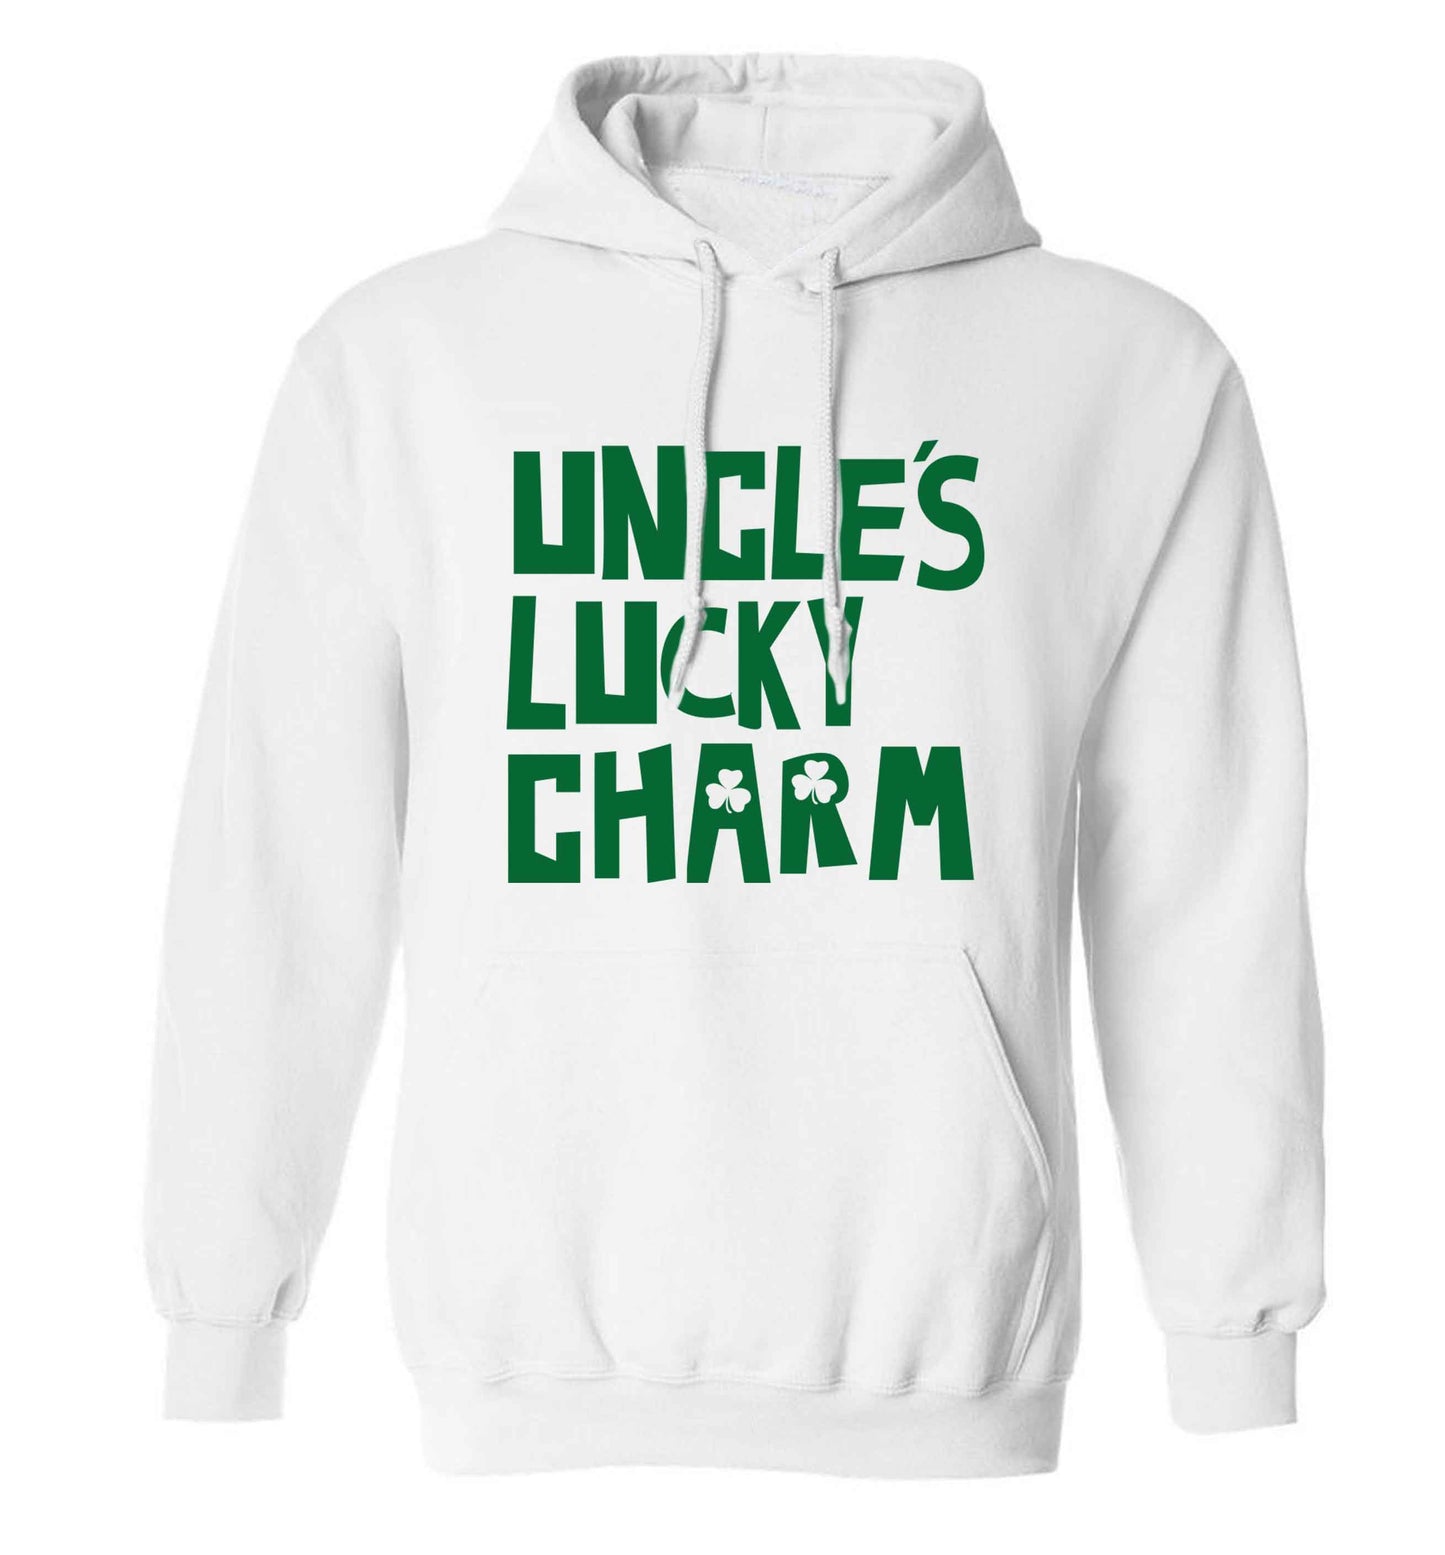 Uncles lucky charm adults unisex white hoodie 2XL